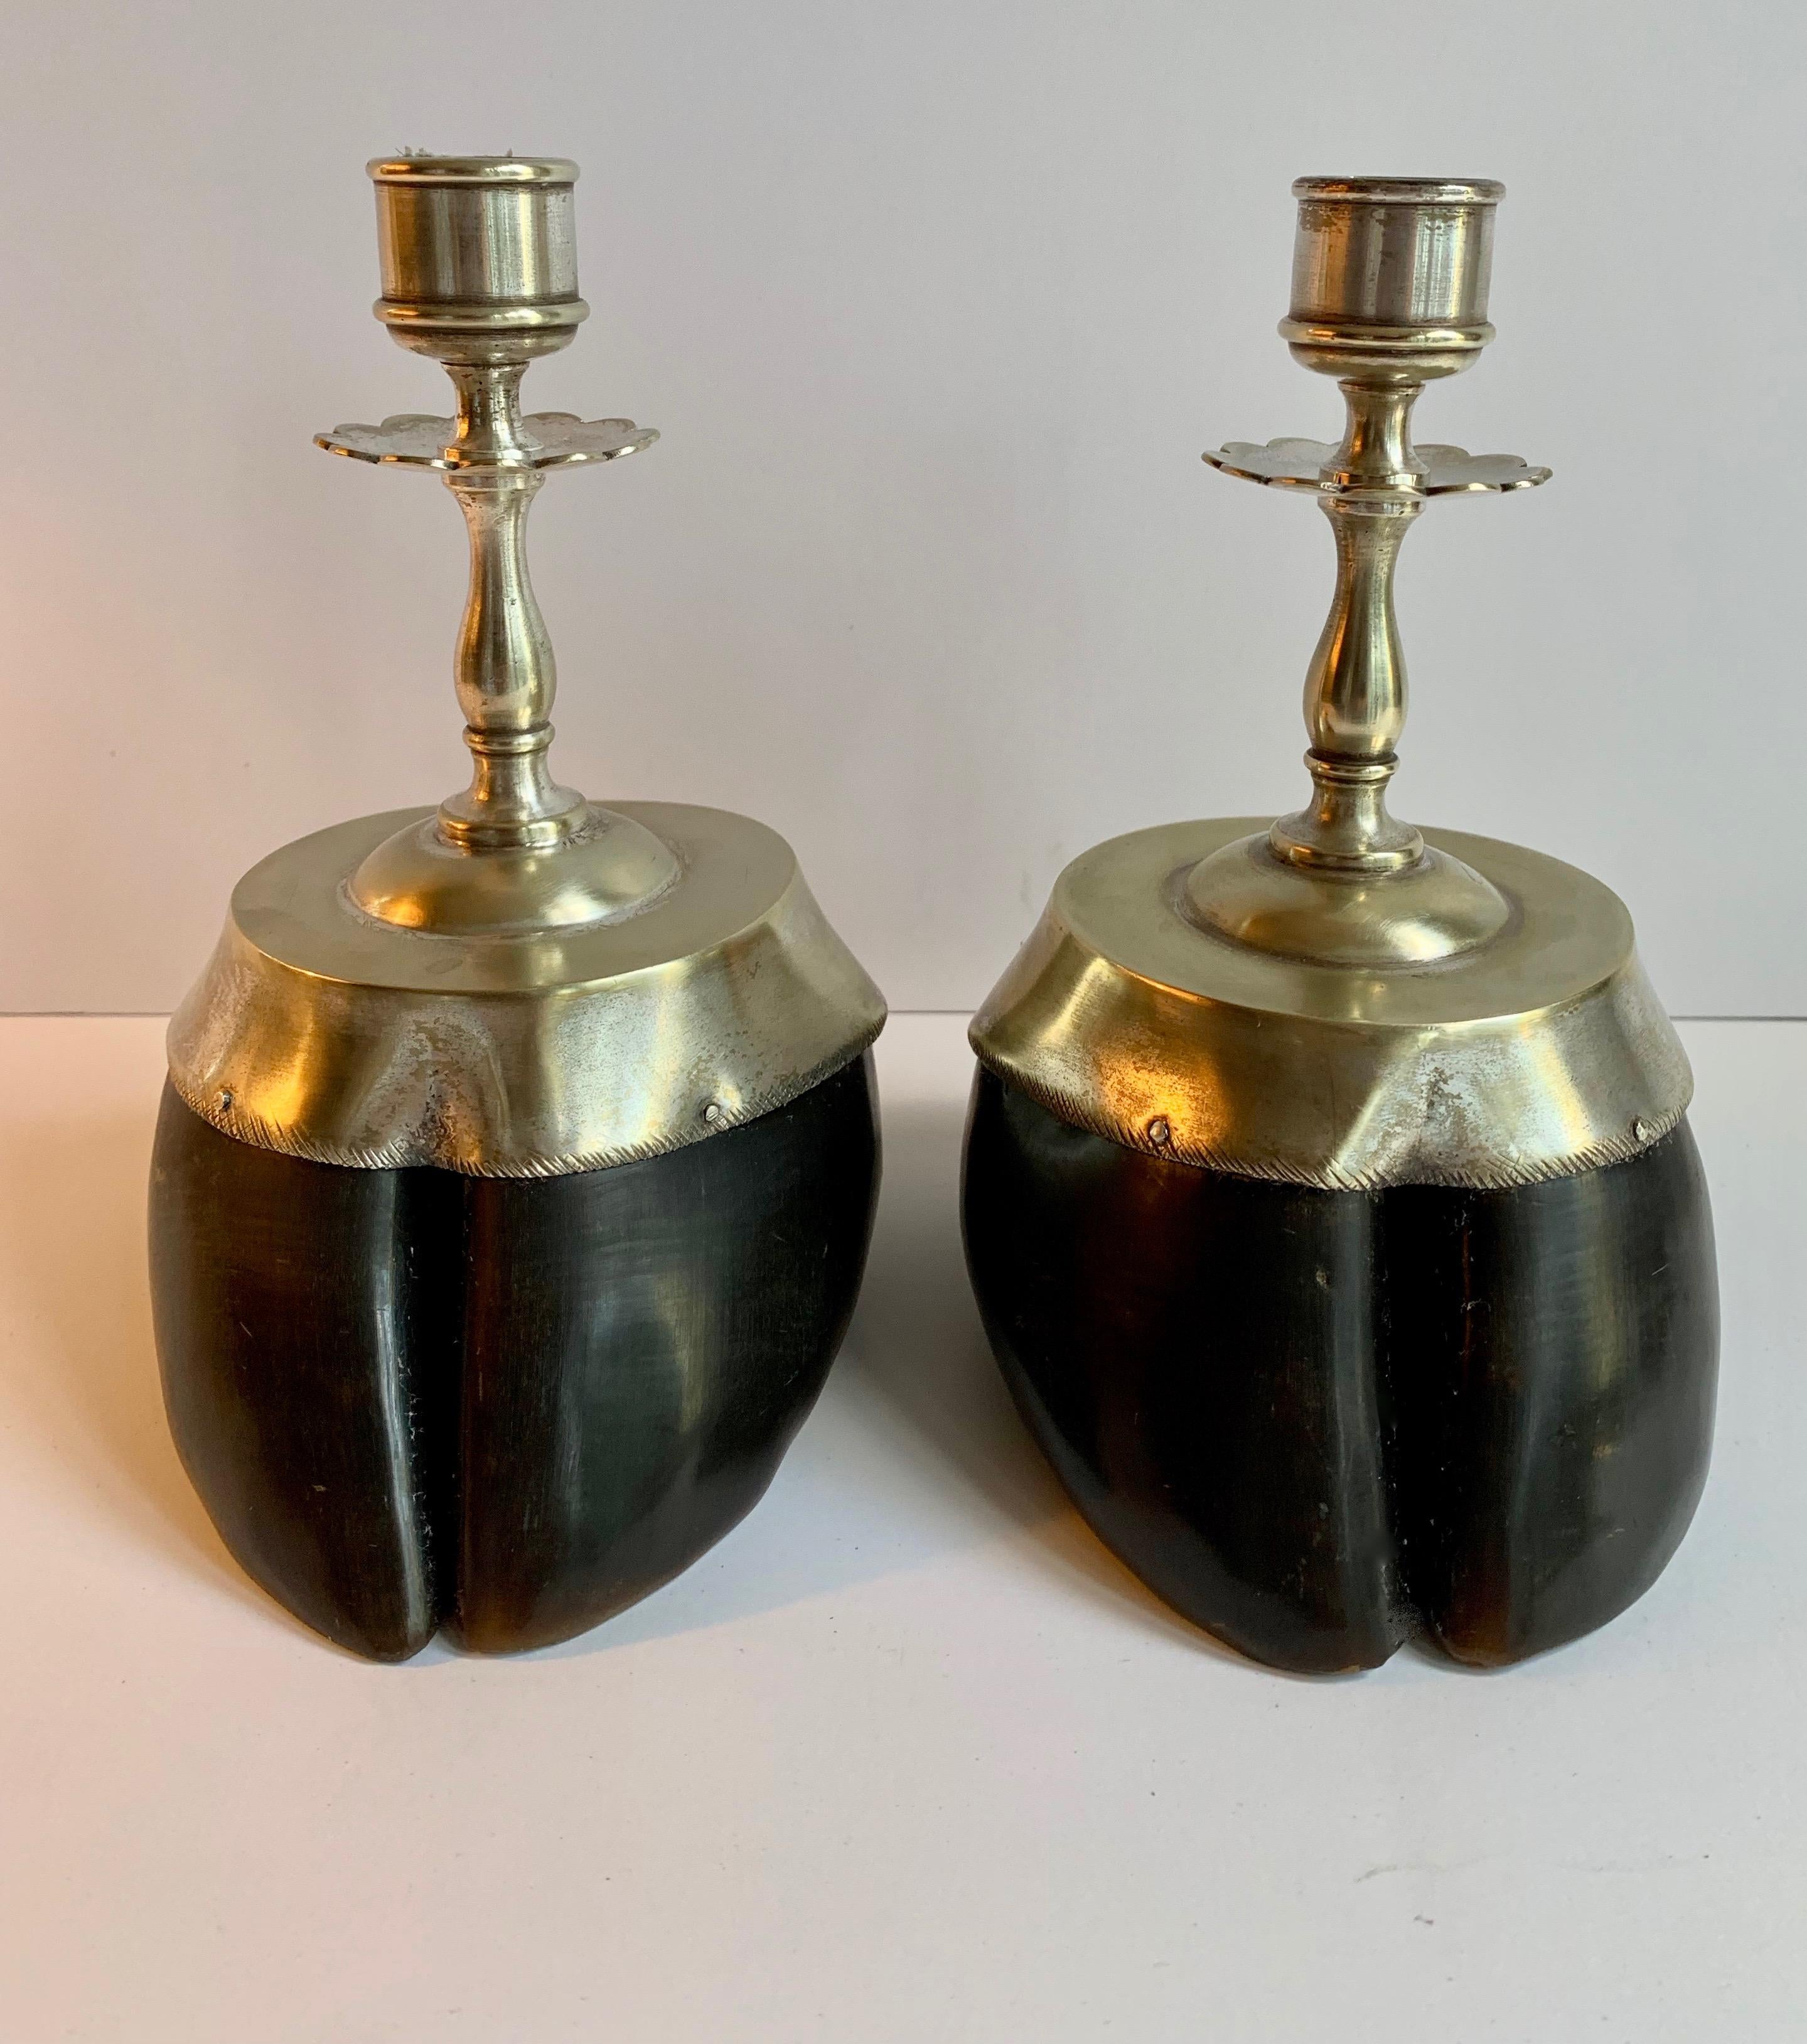 Handsome pair of hoof candlesticks with silver plate details... a perfect compliment to any mantel (fireplace) or dinner table, especially in the rustic room or cabin, but great for the modern space as well! Wonderfully made and detailed.